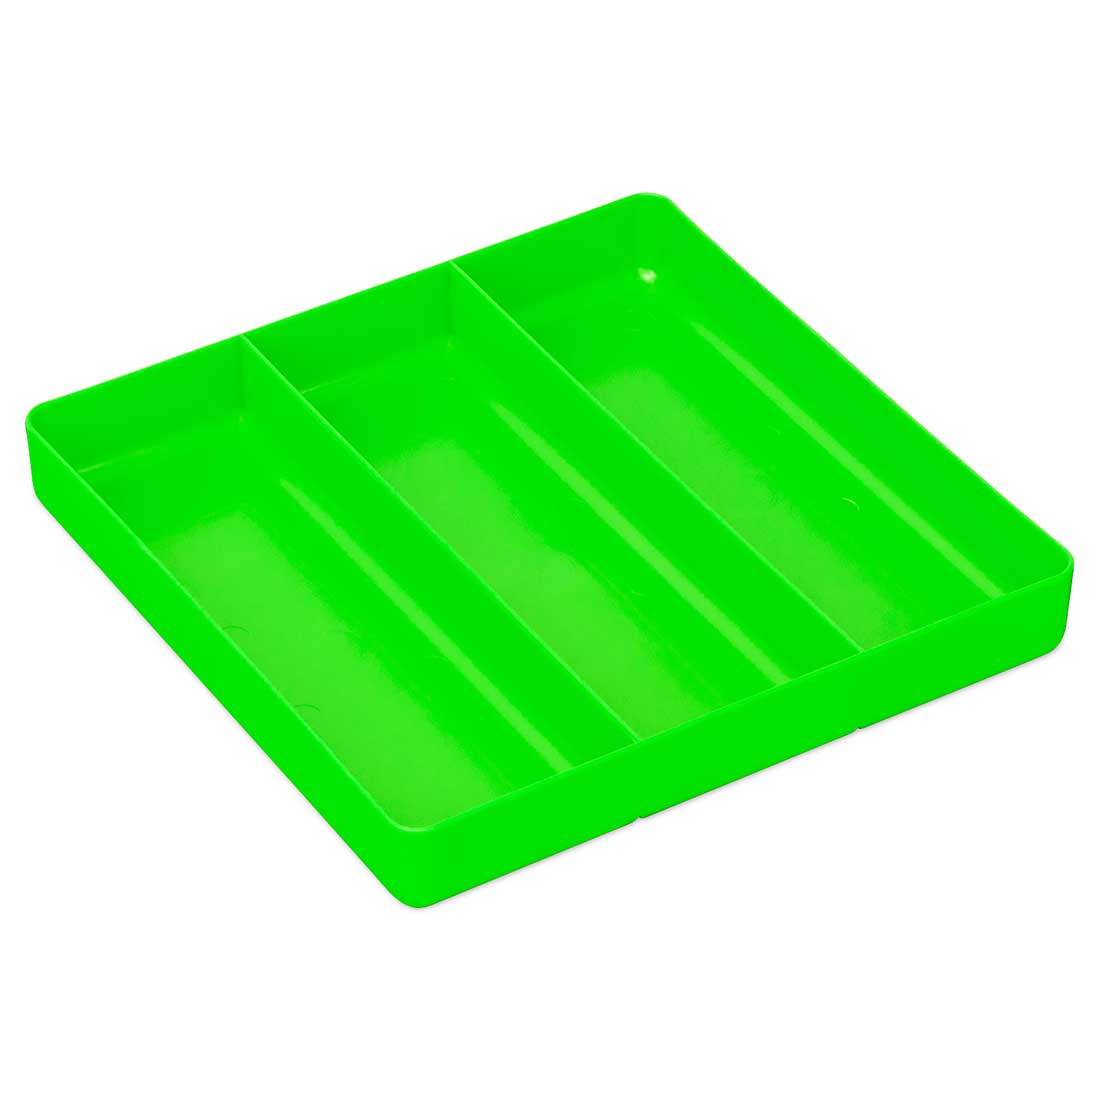 http://www.ernstmfg.com/Shared/Images/Product/Three-Compartment-Organizer-Tray-Green/789455050241-MAIN.jpg